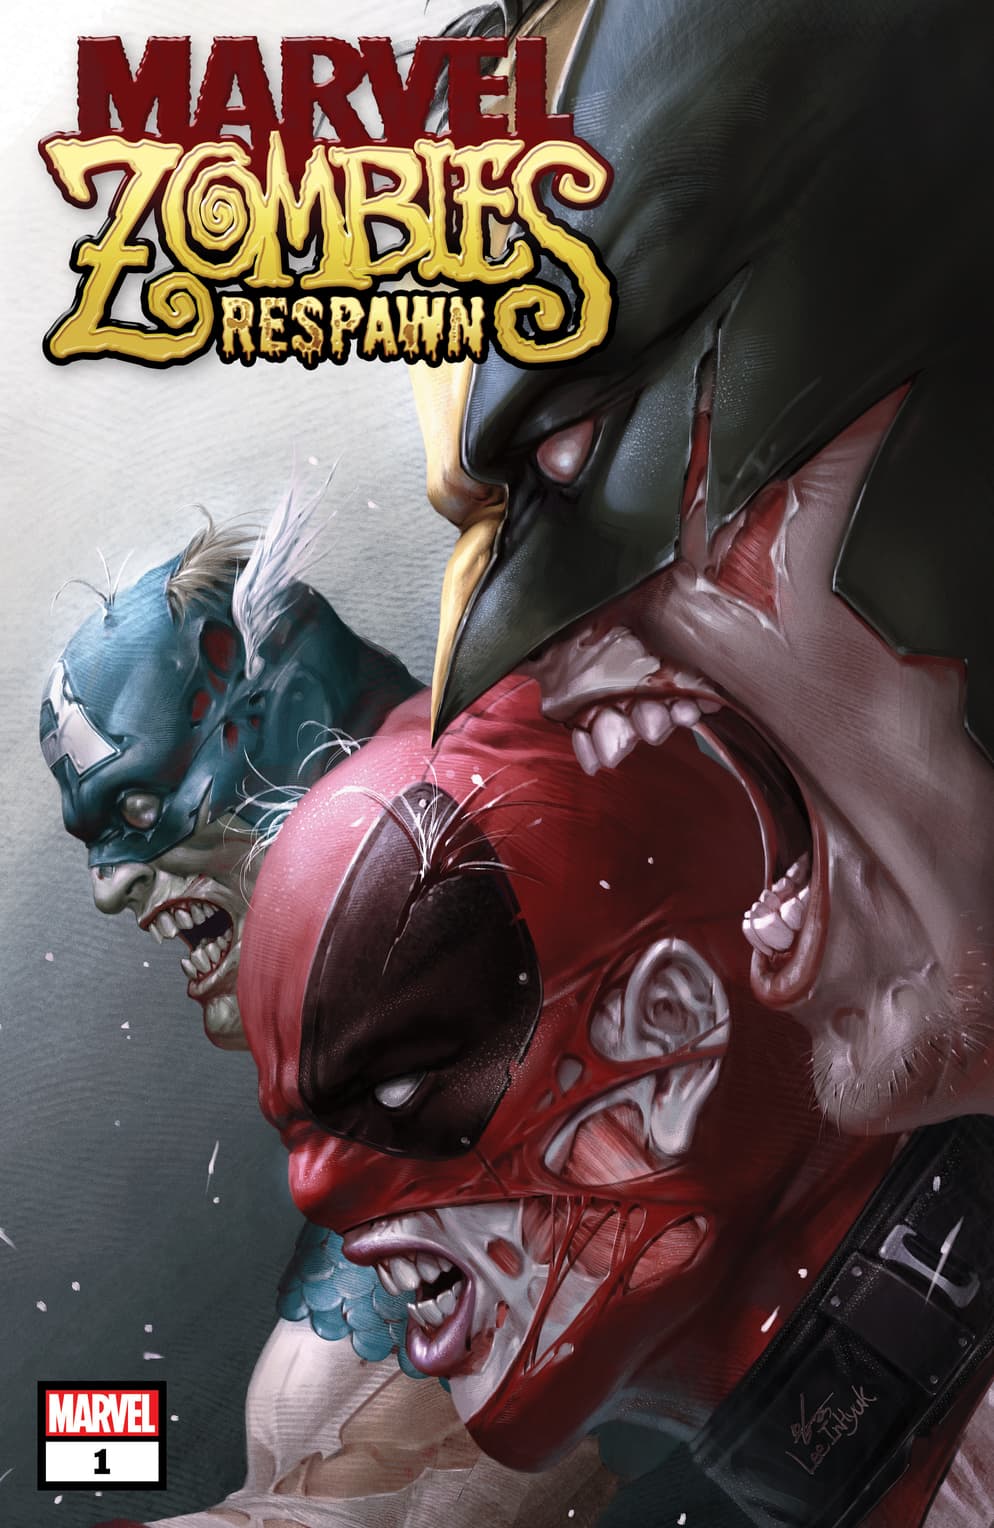 MARVEL ZOMBIES: RESPAWN #1